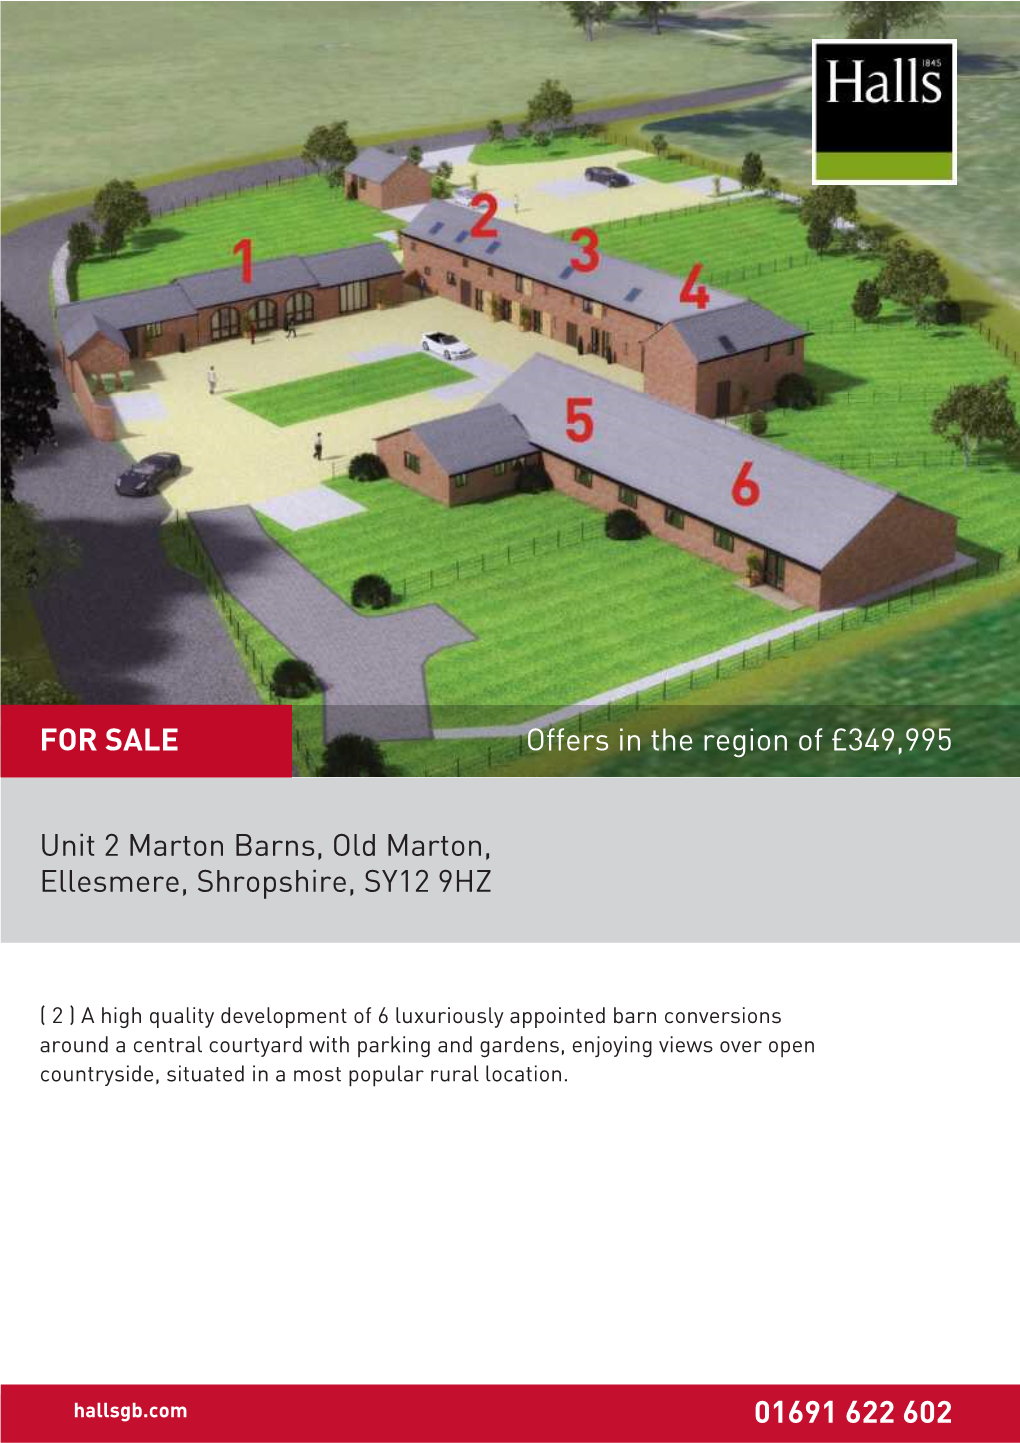 Unit 2 Marton Barns, Old Marton, Ellesmere, Shropshire, SY12 9HZ 01691 622 602 Offers in the Region of £349,995 for SALE